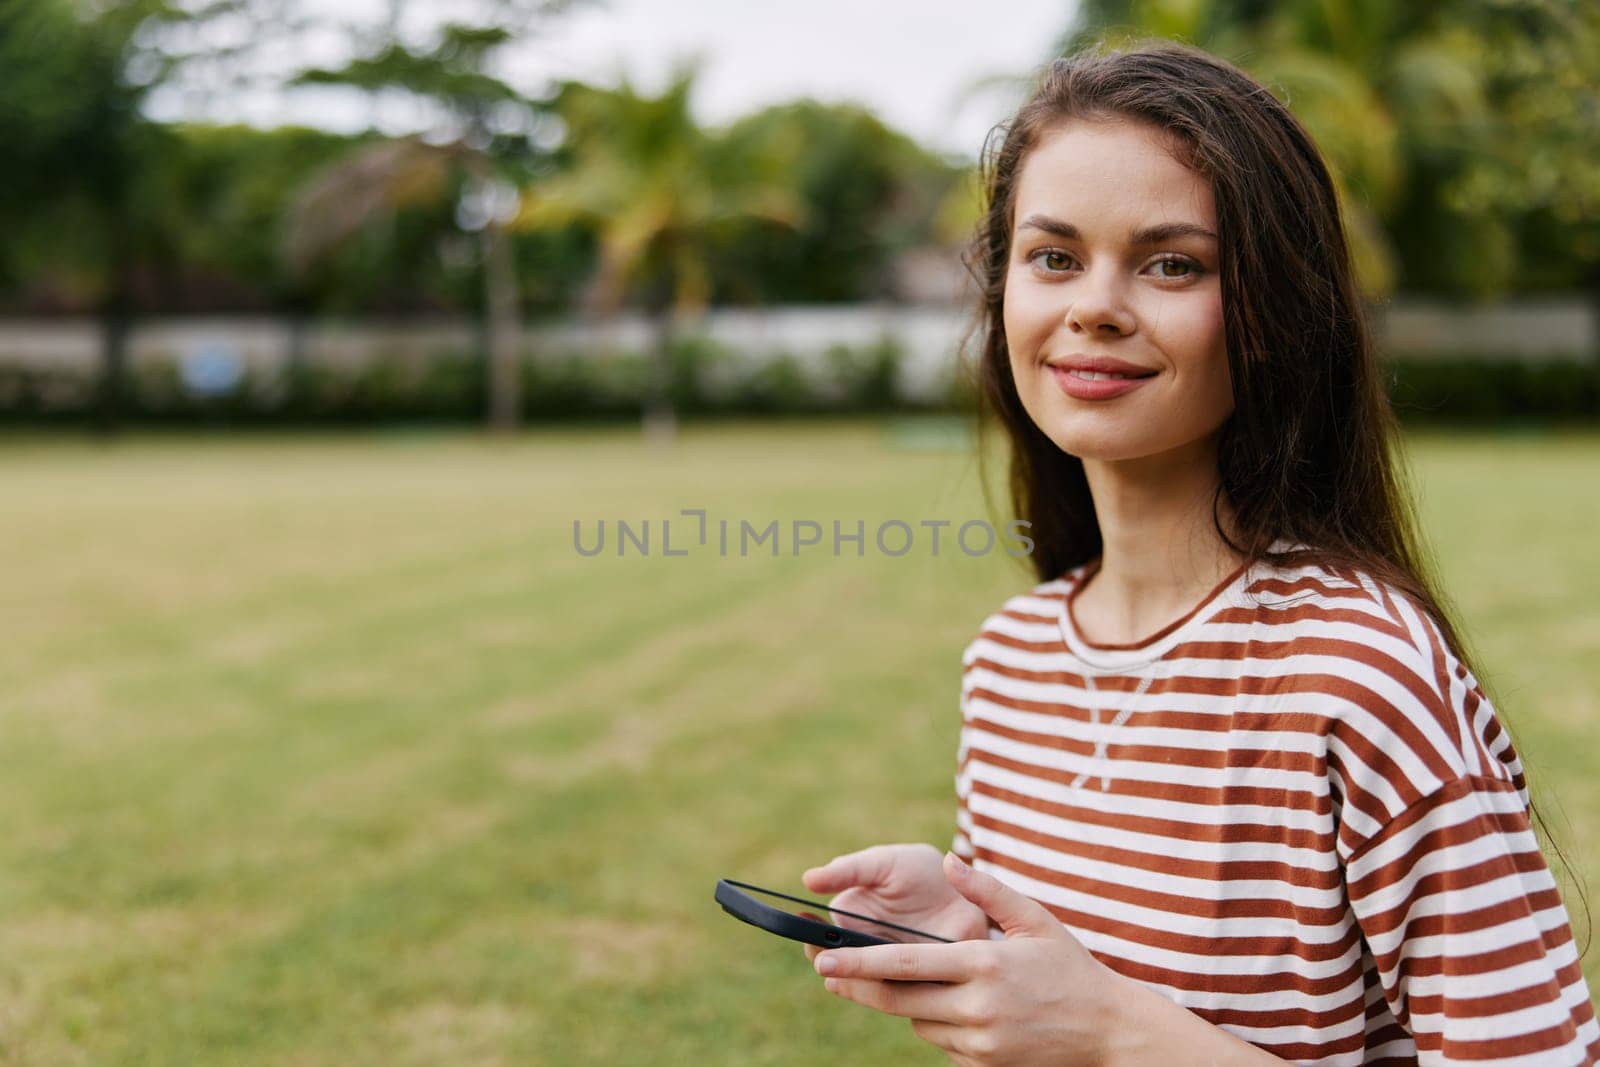 talk woman adult grass bag caucasian talking human striped jeans happy walk phone blogger tree palm park working smiling lifestyle network nature